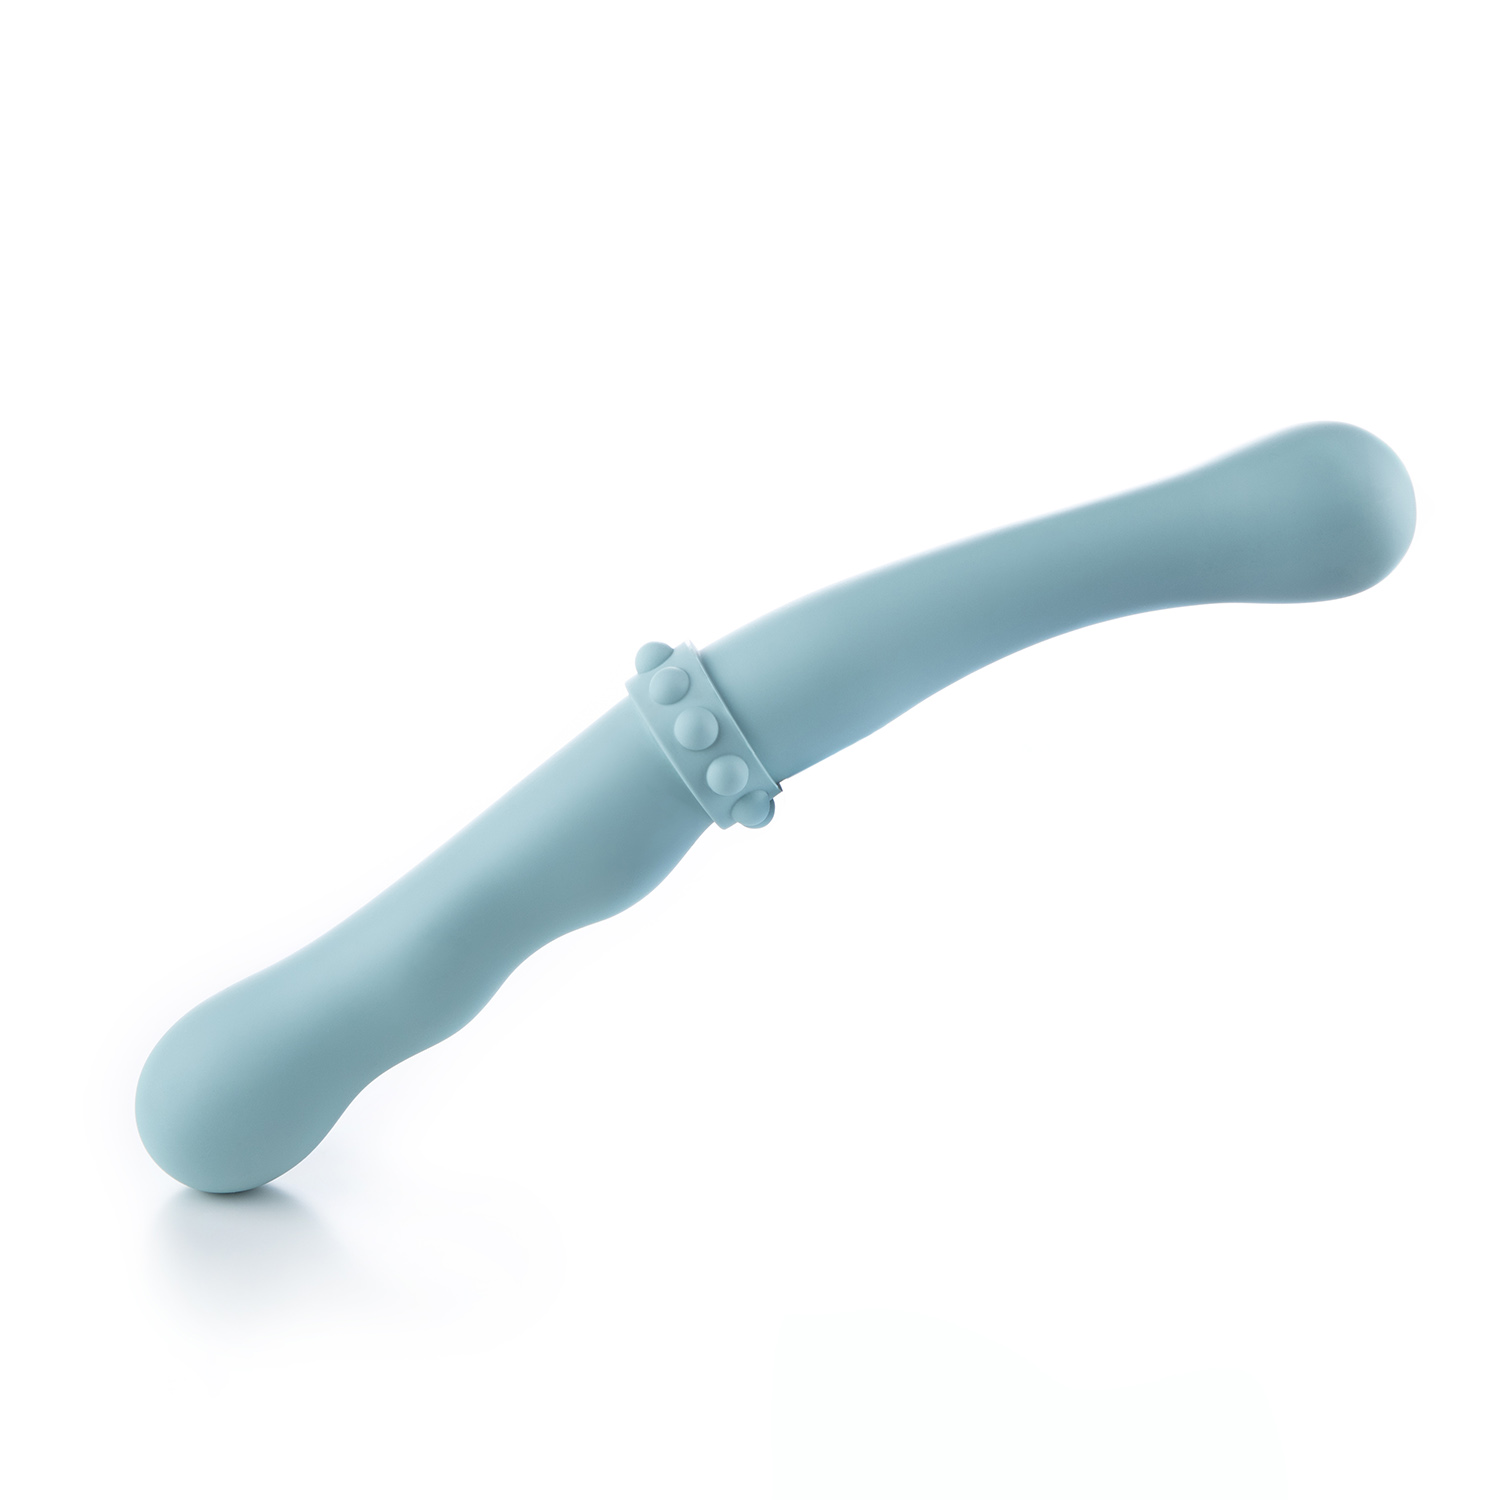 CLASSIC SMOOTH DOUBLE ENDED DILDO INTIMACY IN BLUE